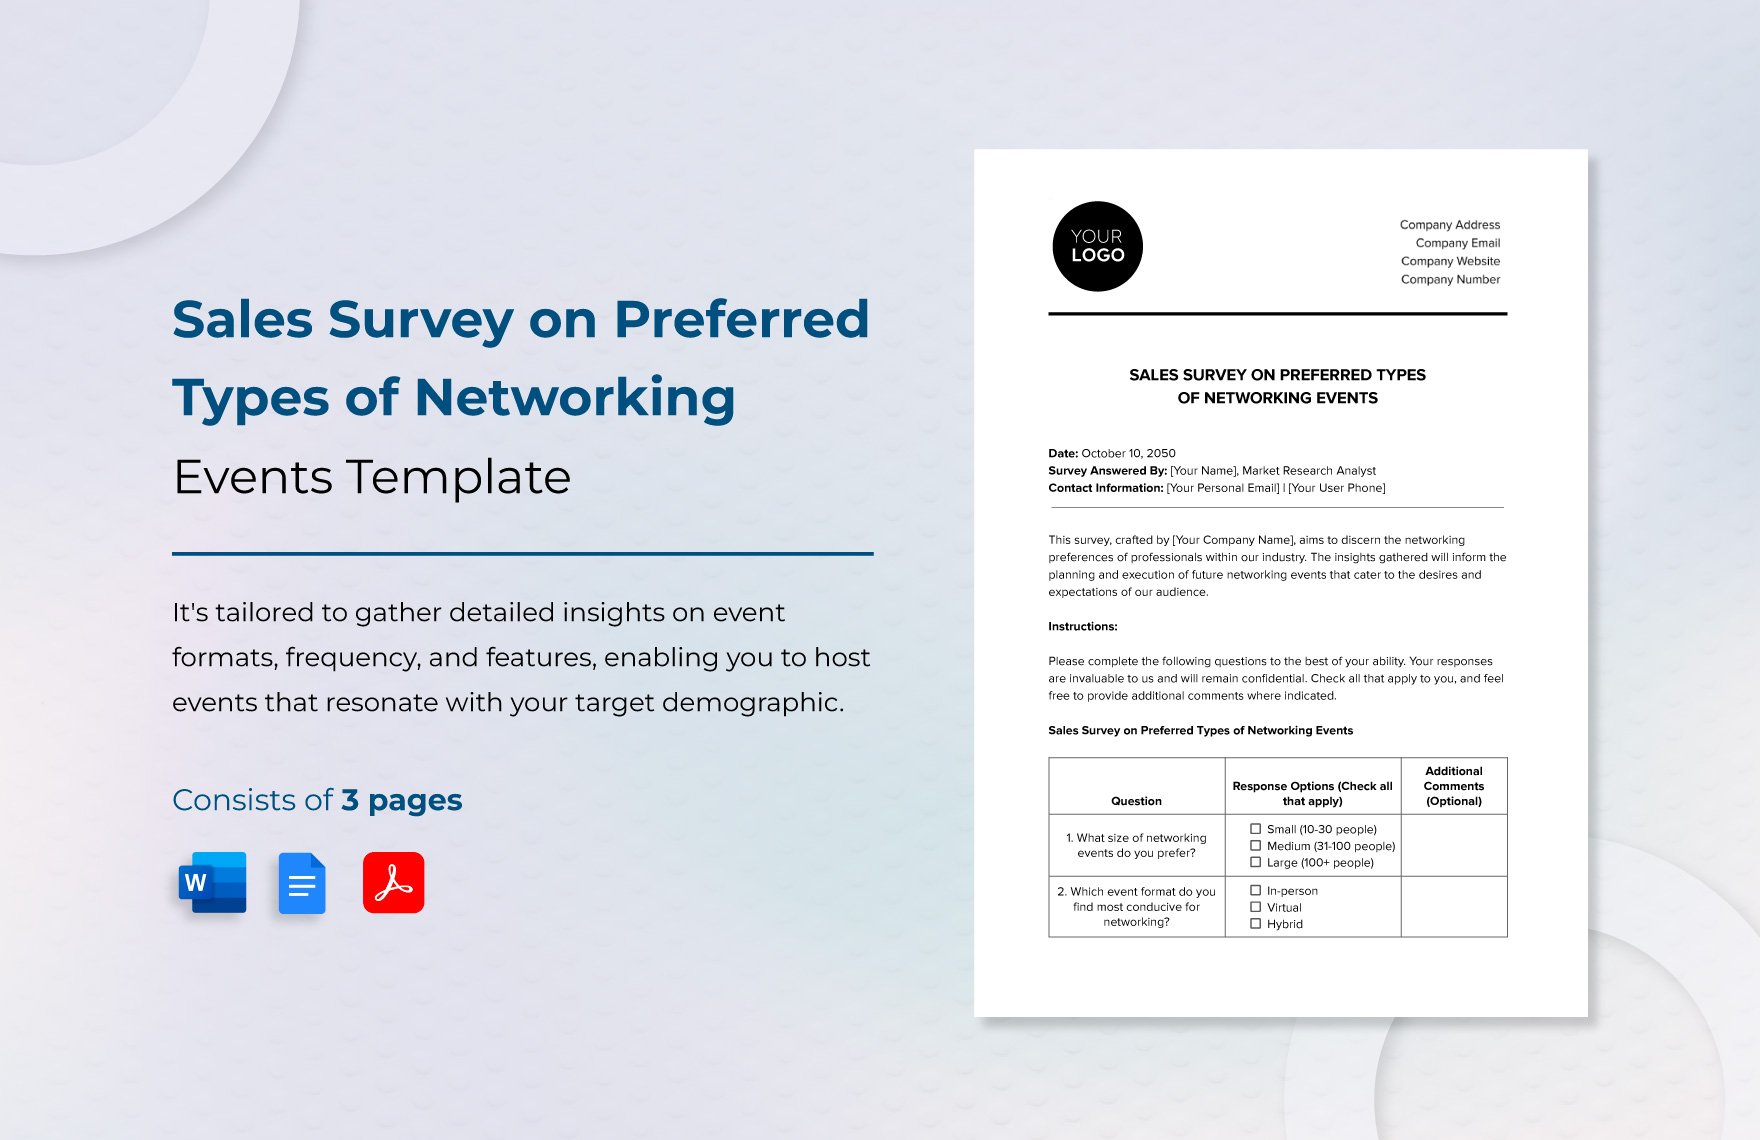 Sales Survey on Preferred Types of Networking Events Template